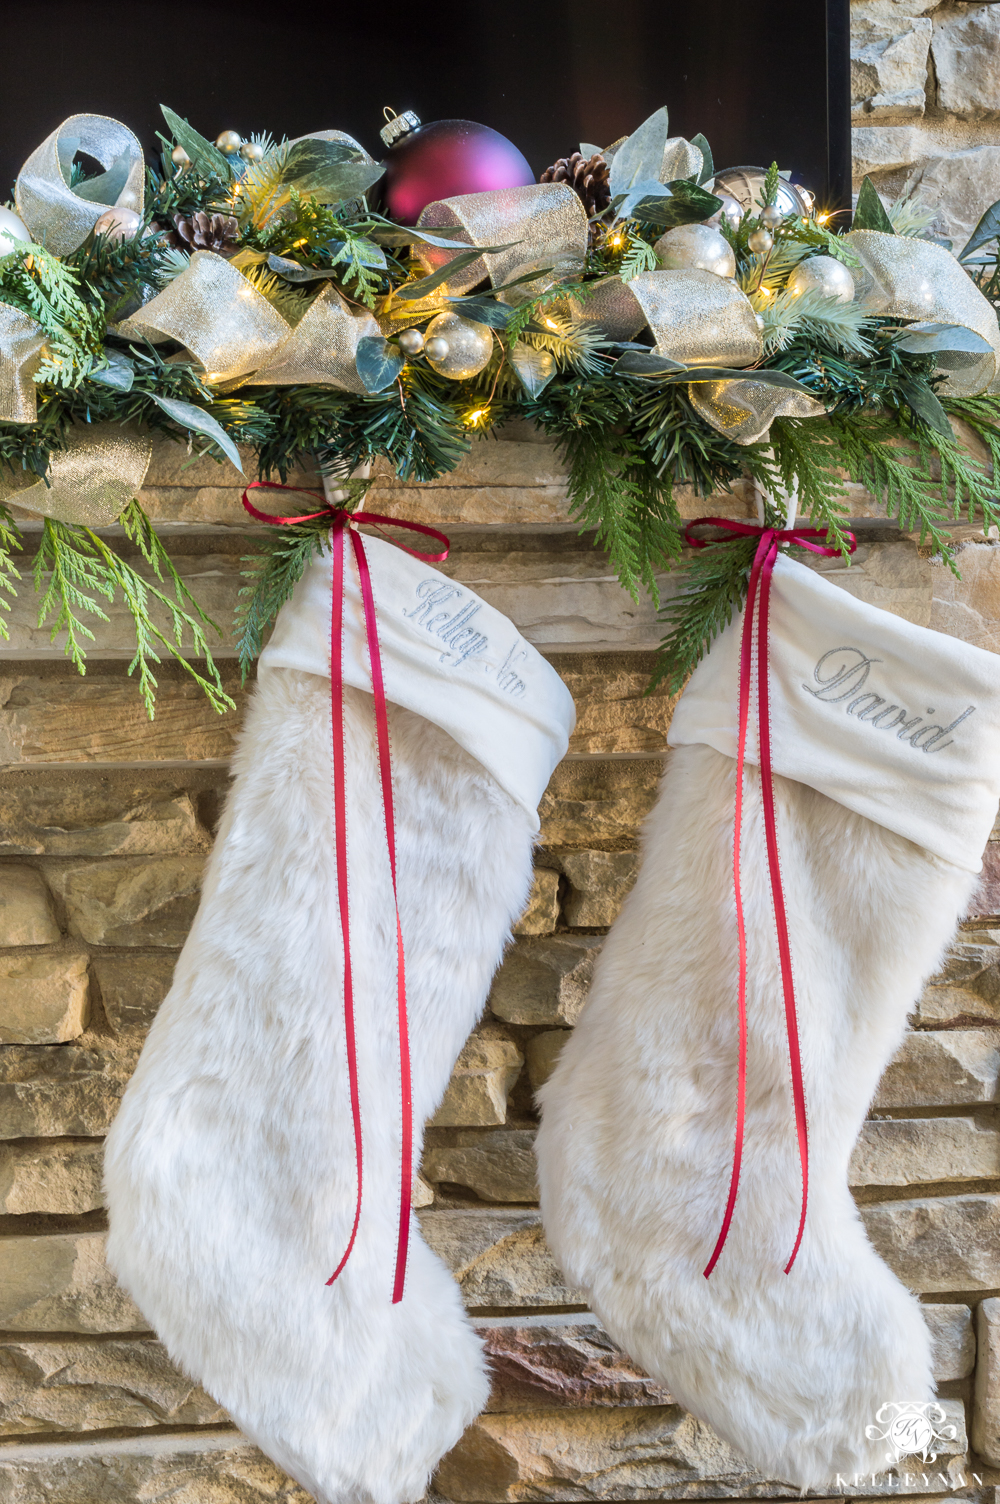 Stockings with ribbons and greenery accents